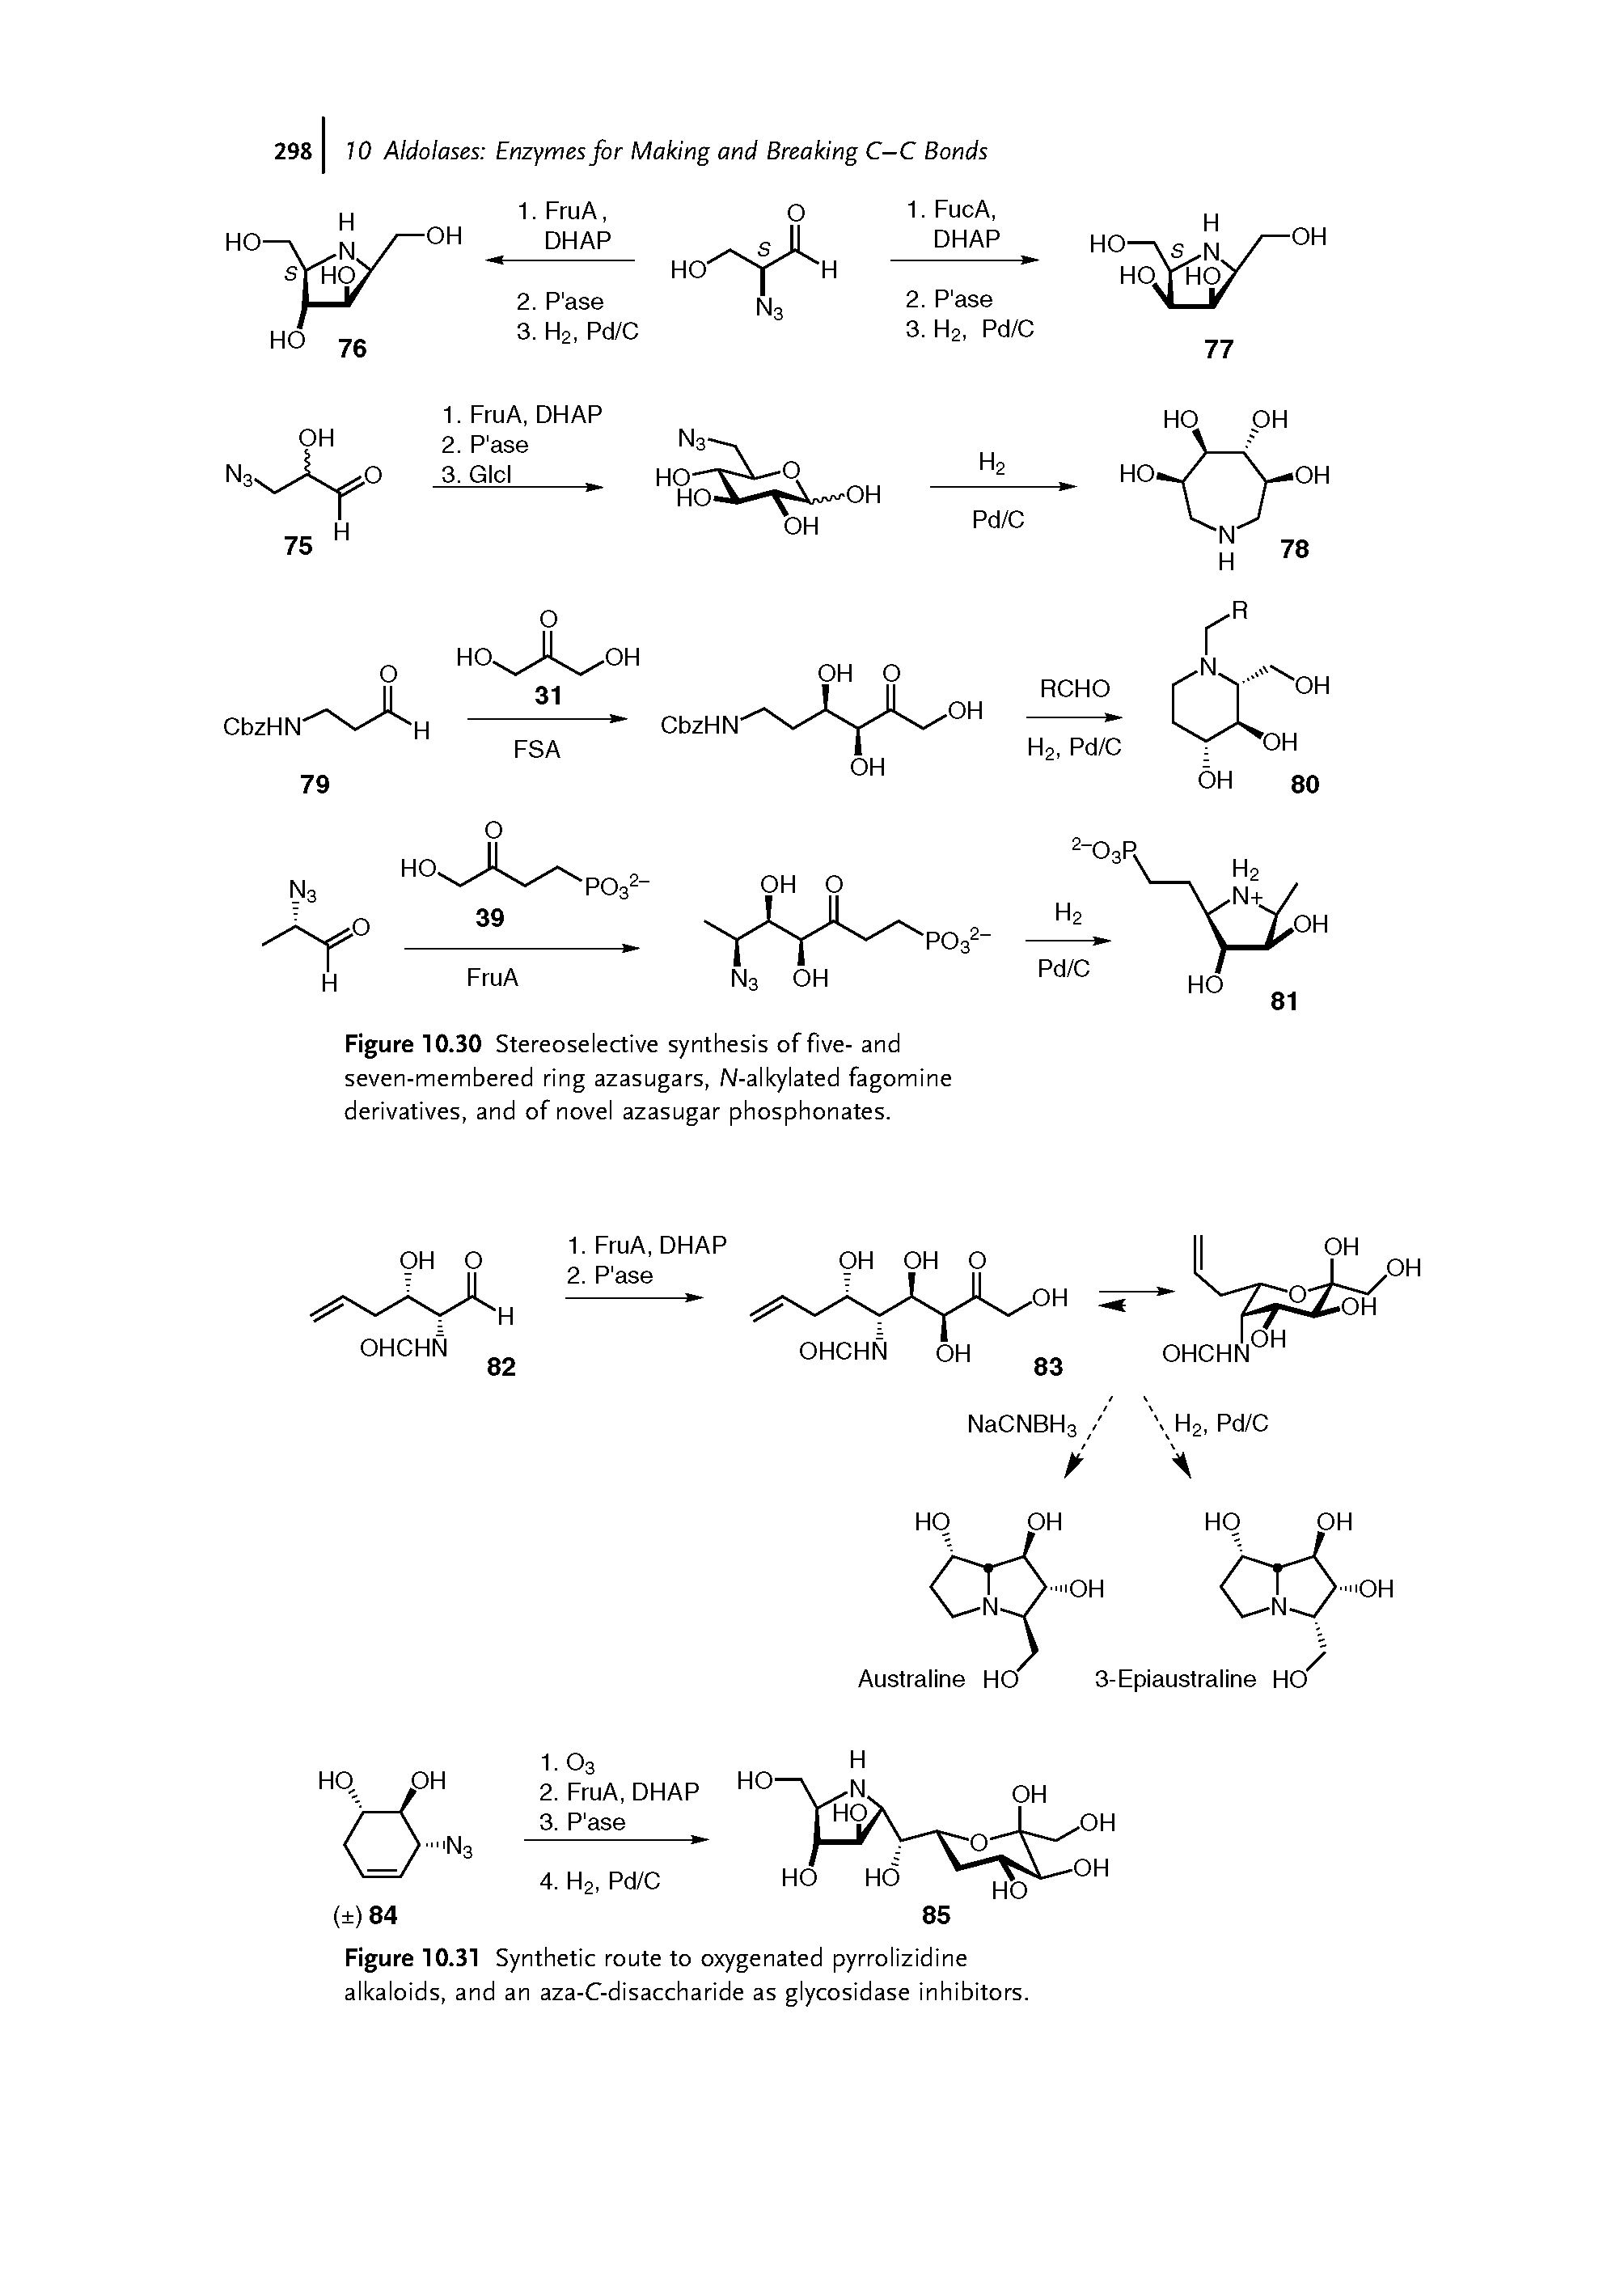 Figure 10.31 Synthetic route to oxygenated pyrrolizidine alkaloids, and an aza-C-disaccharide as glycosidase inhibitors.